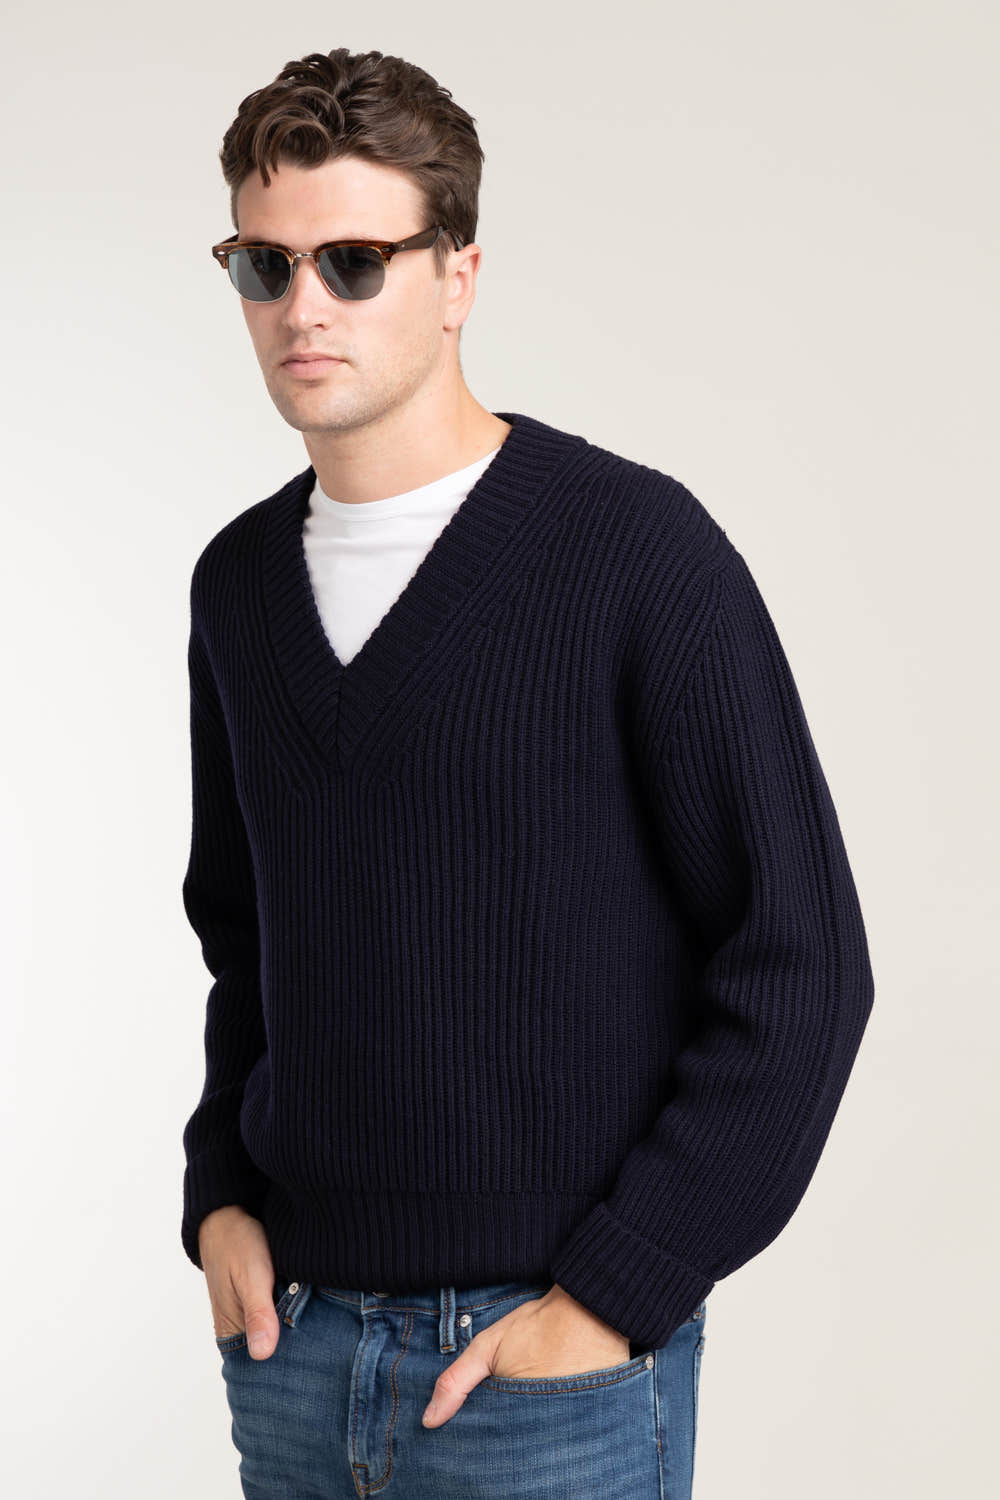 How To Shop Better For Woolen Clothes